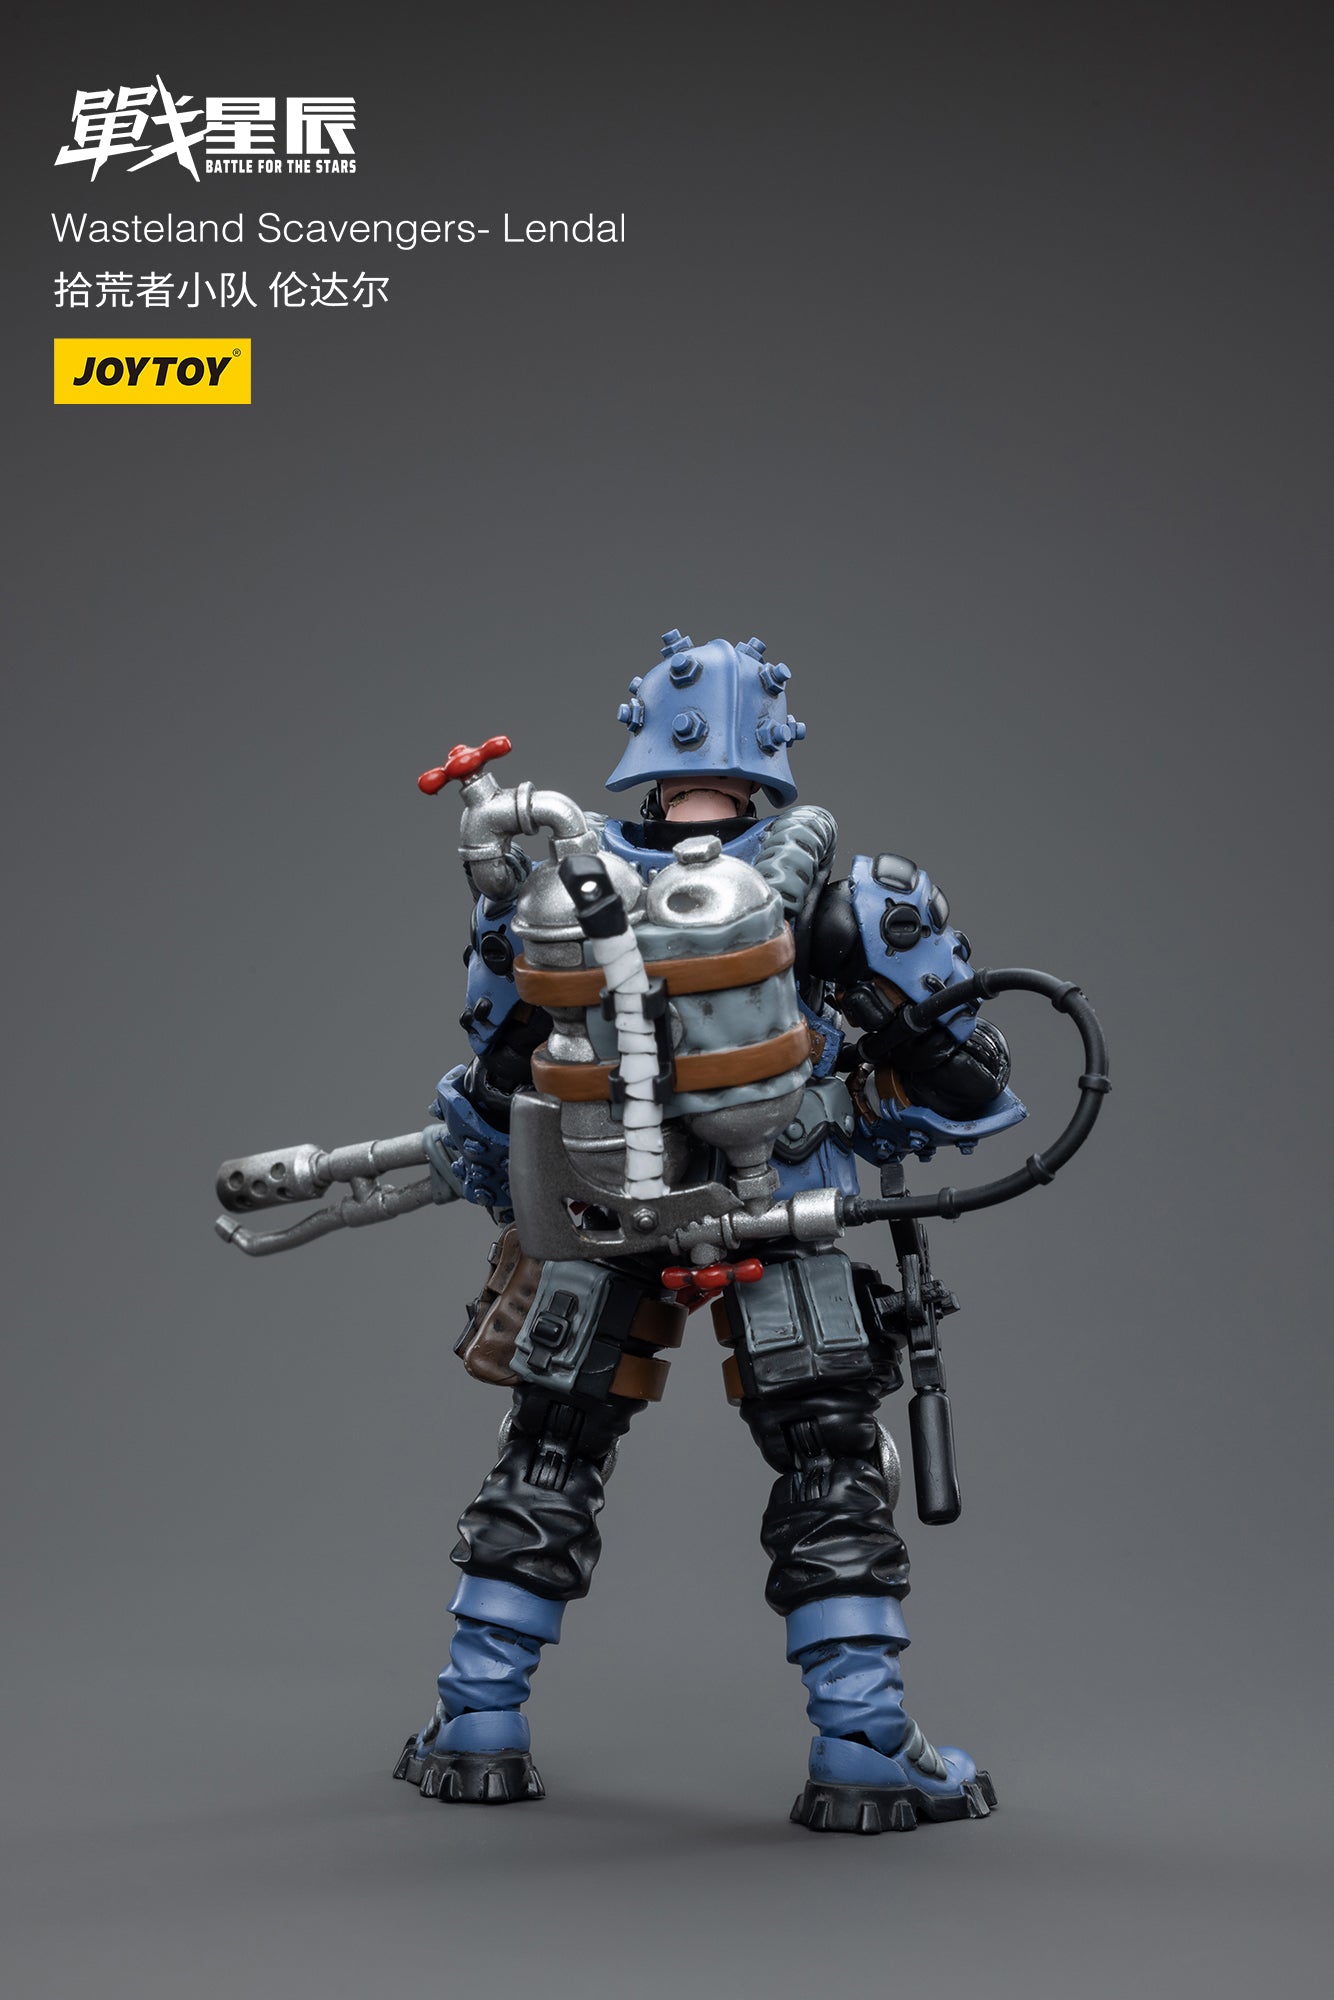 Joy Toy brings Battle for the stars Wasteland Scavengers 1/18 scale figures. JoyToy each figure includes interchangeable hands and weapon accessories and stands between 4" and 6" tall.